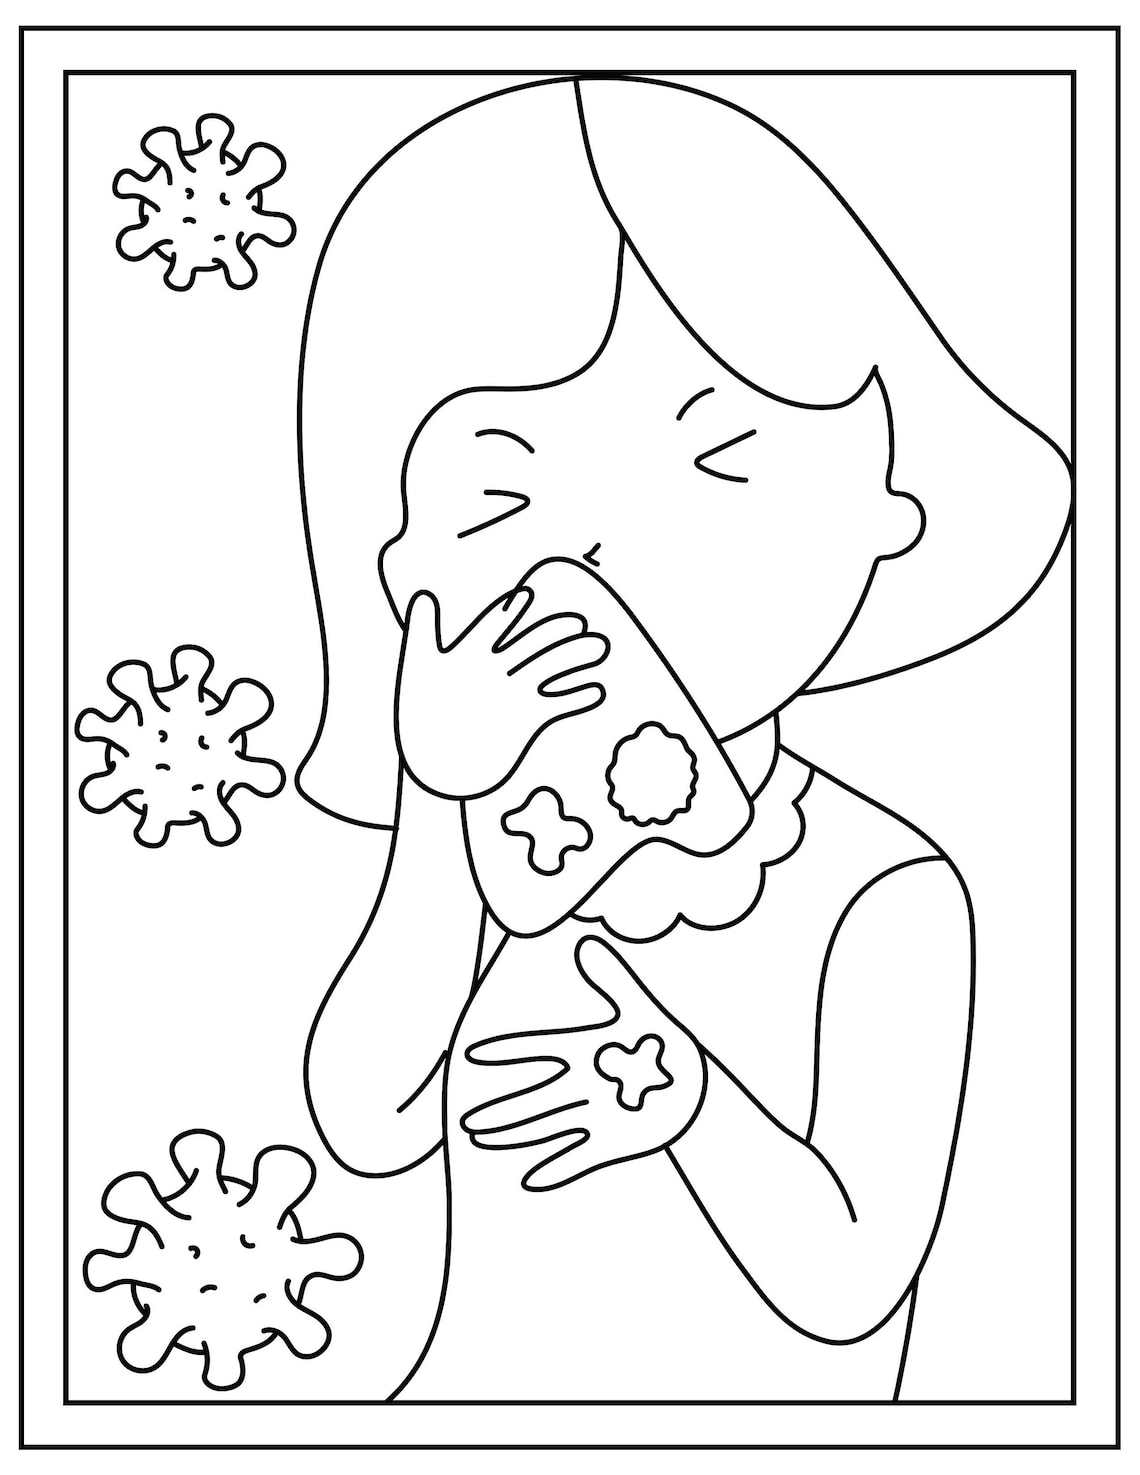 germs-coloring-sheet-coloring-pages